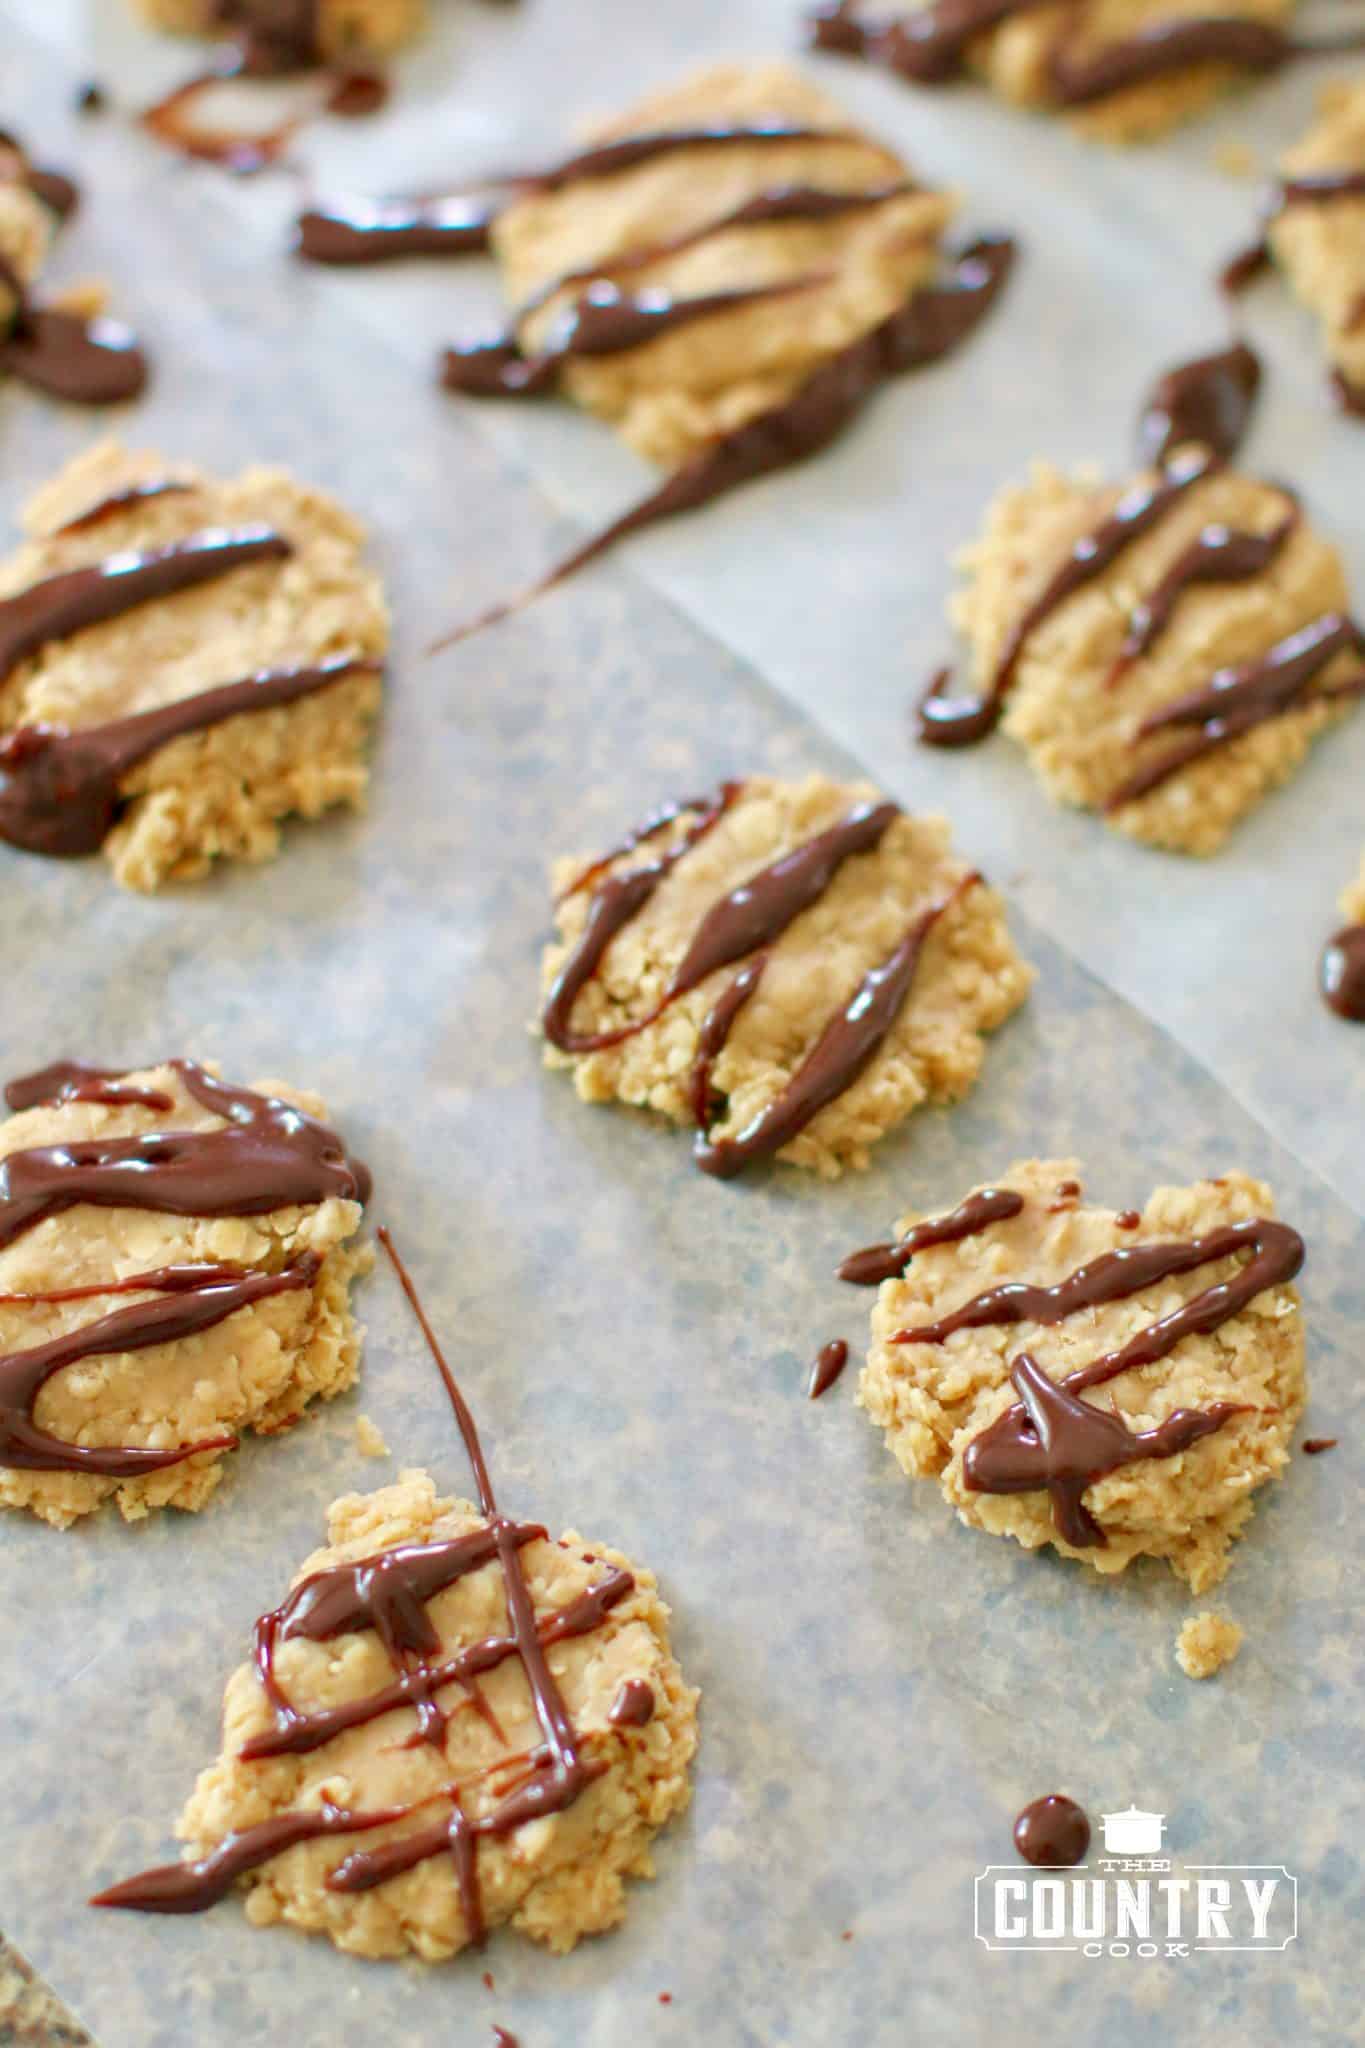 cookies shown with melted chocolate drizzled on top.